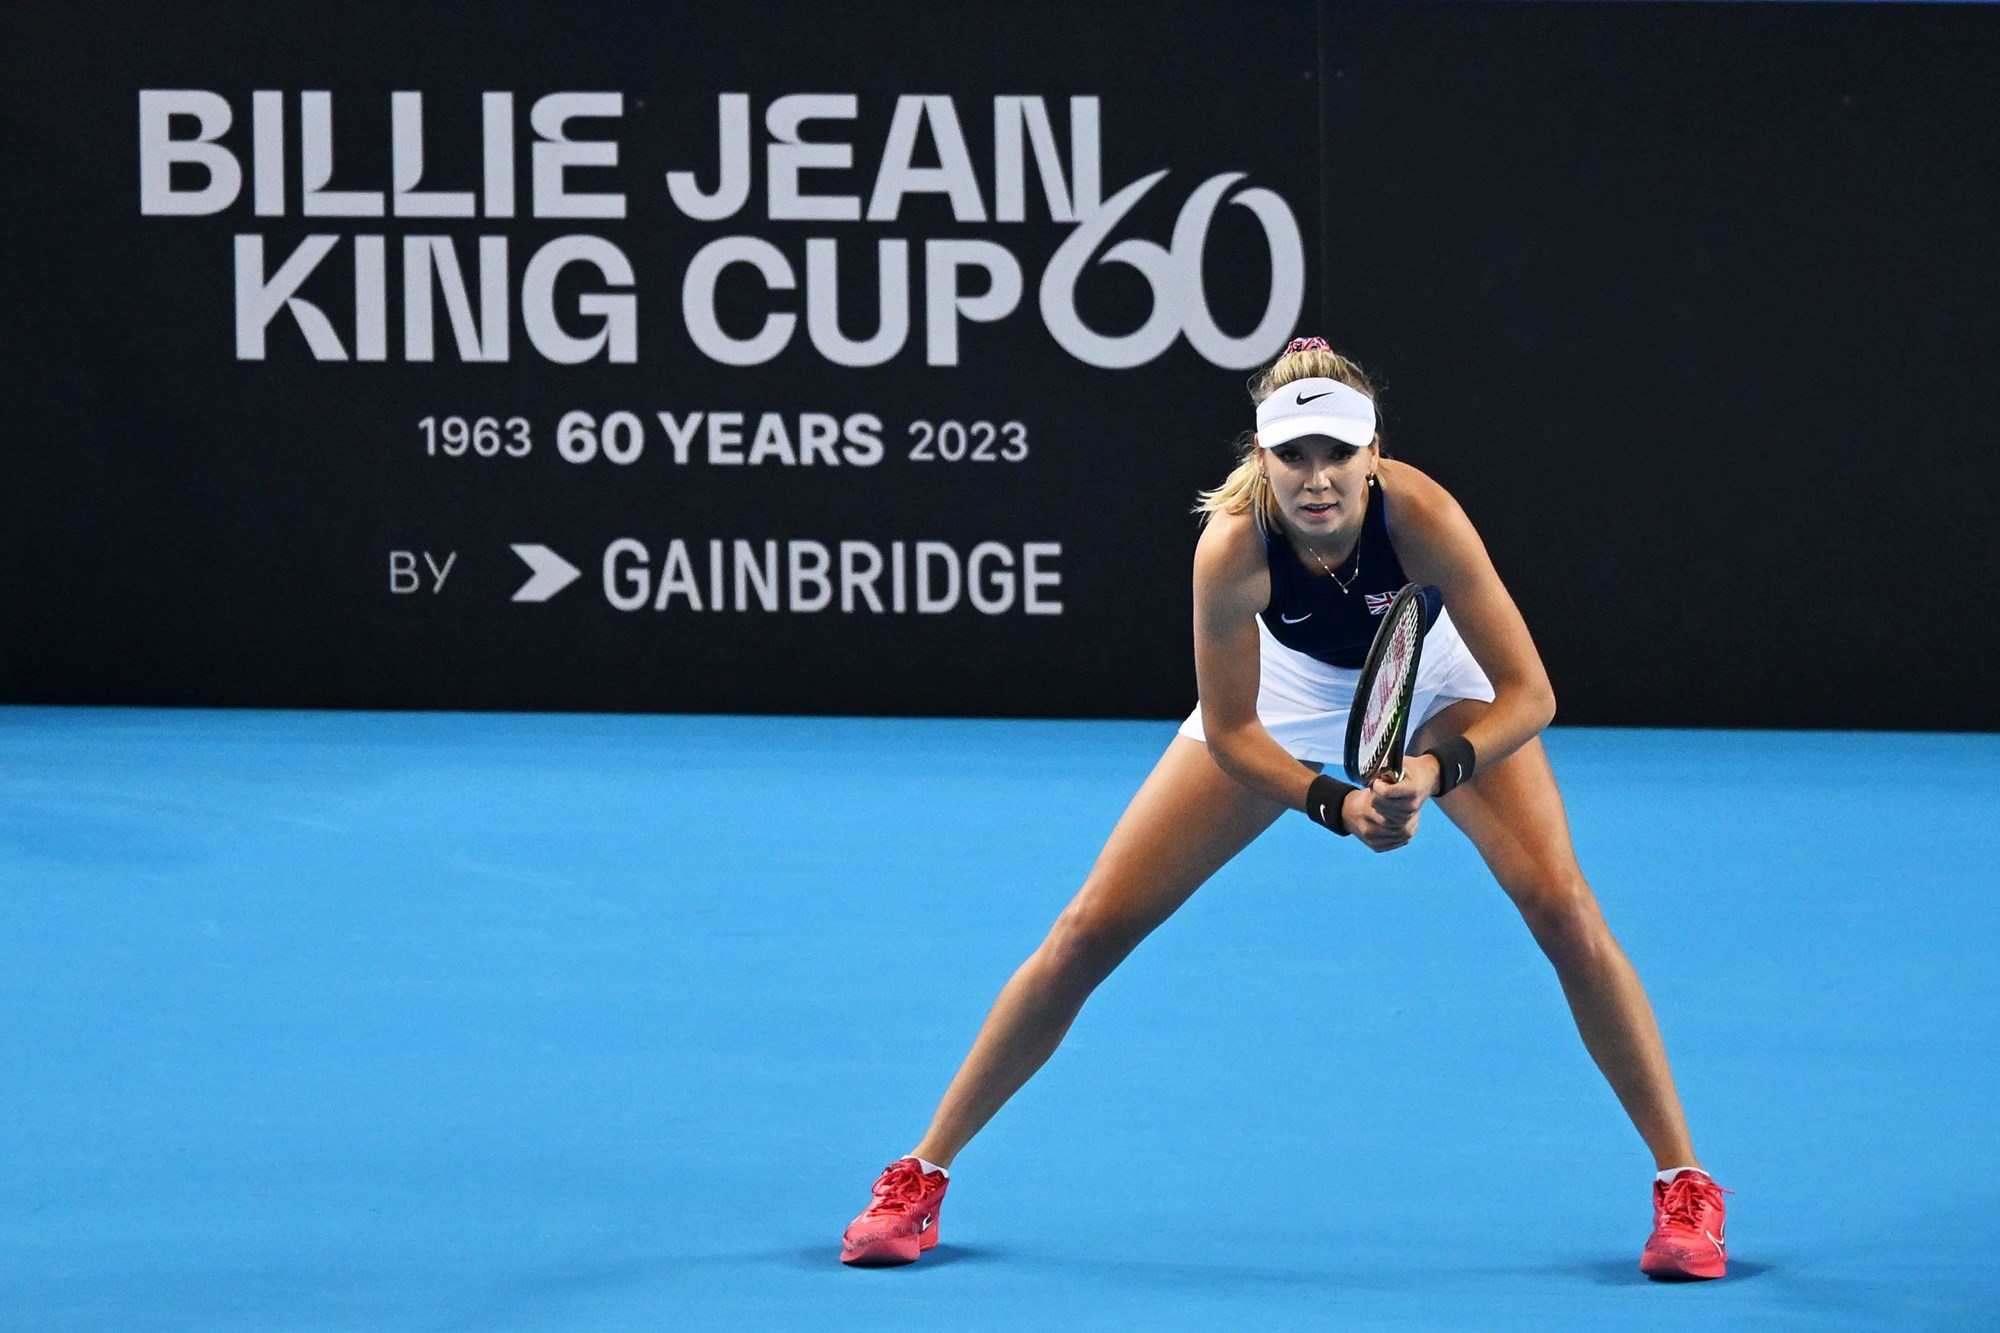 Katie Boulter stood in front of a Billie Jean King Cup advertisement board while preparing to return a serve on court